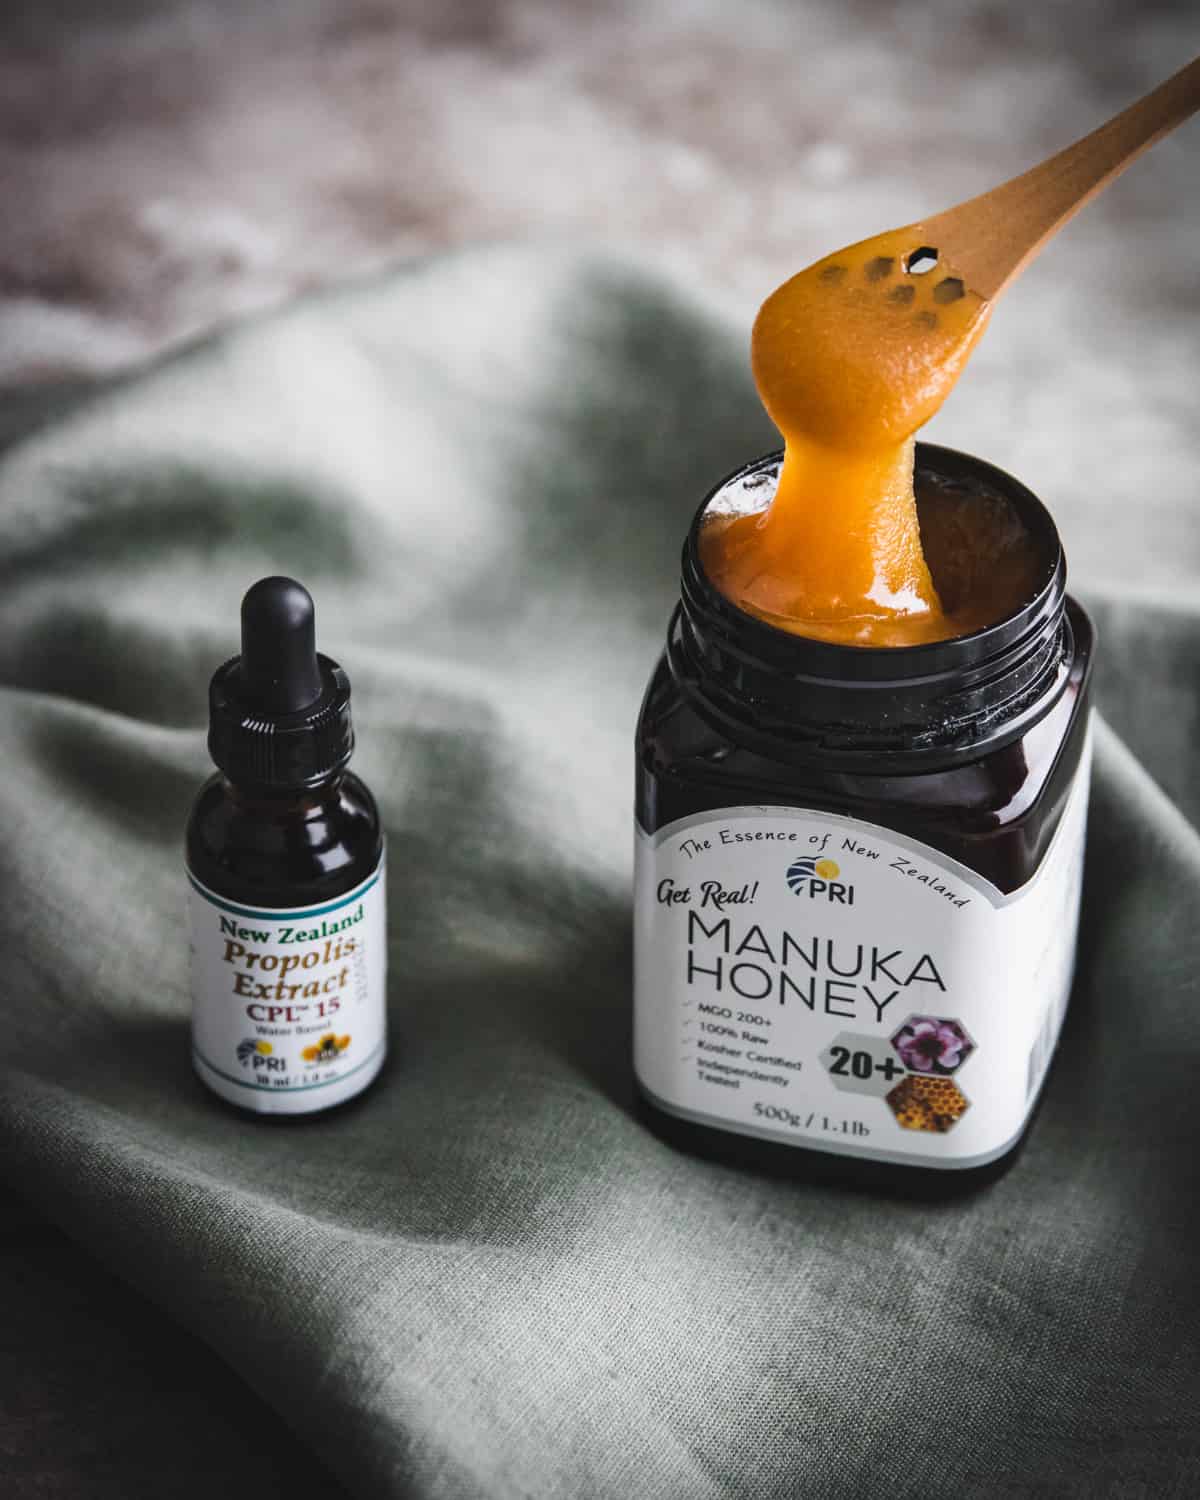 a bottle of propolis extract and a jar of manuka honey from PRI